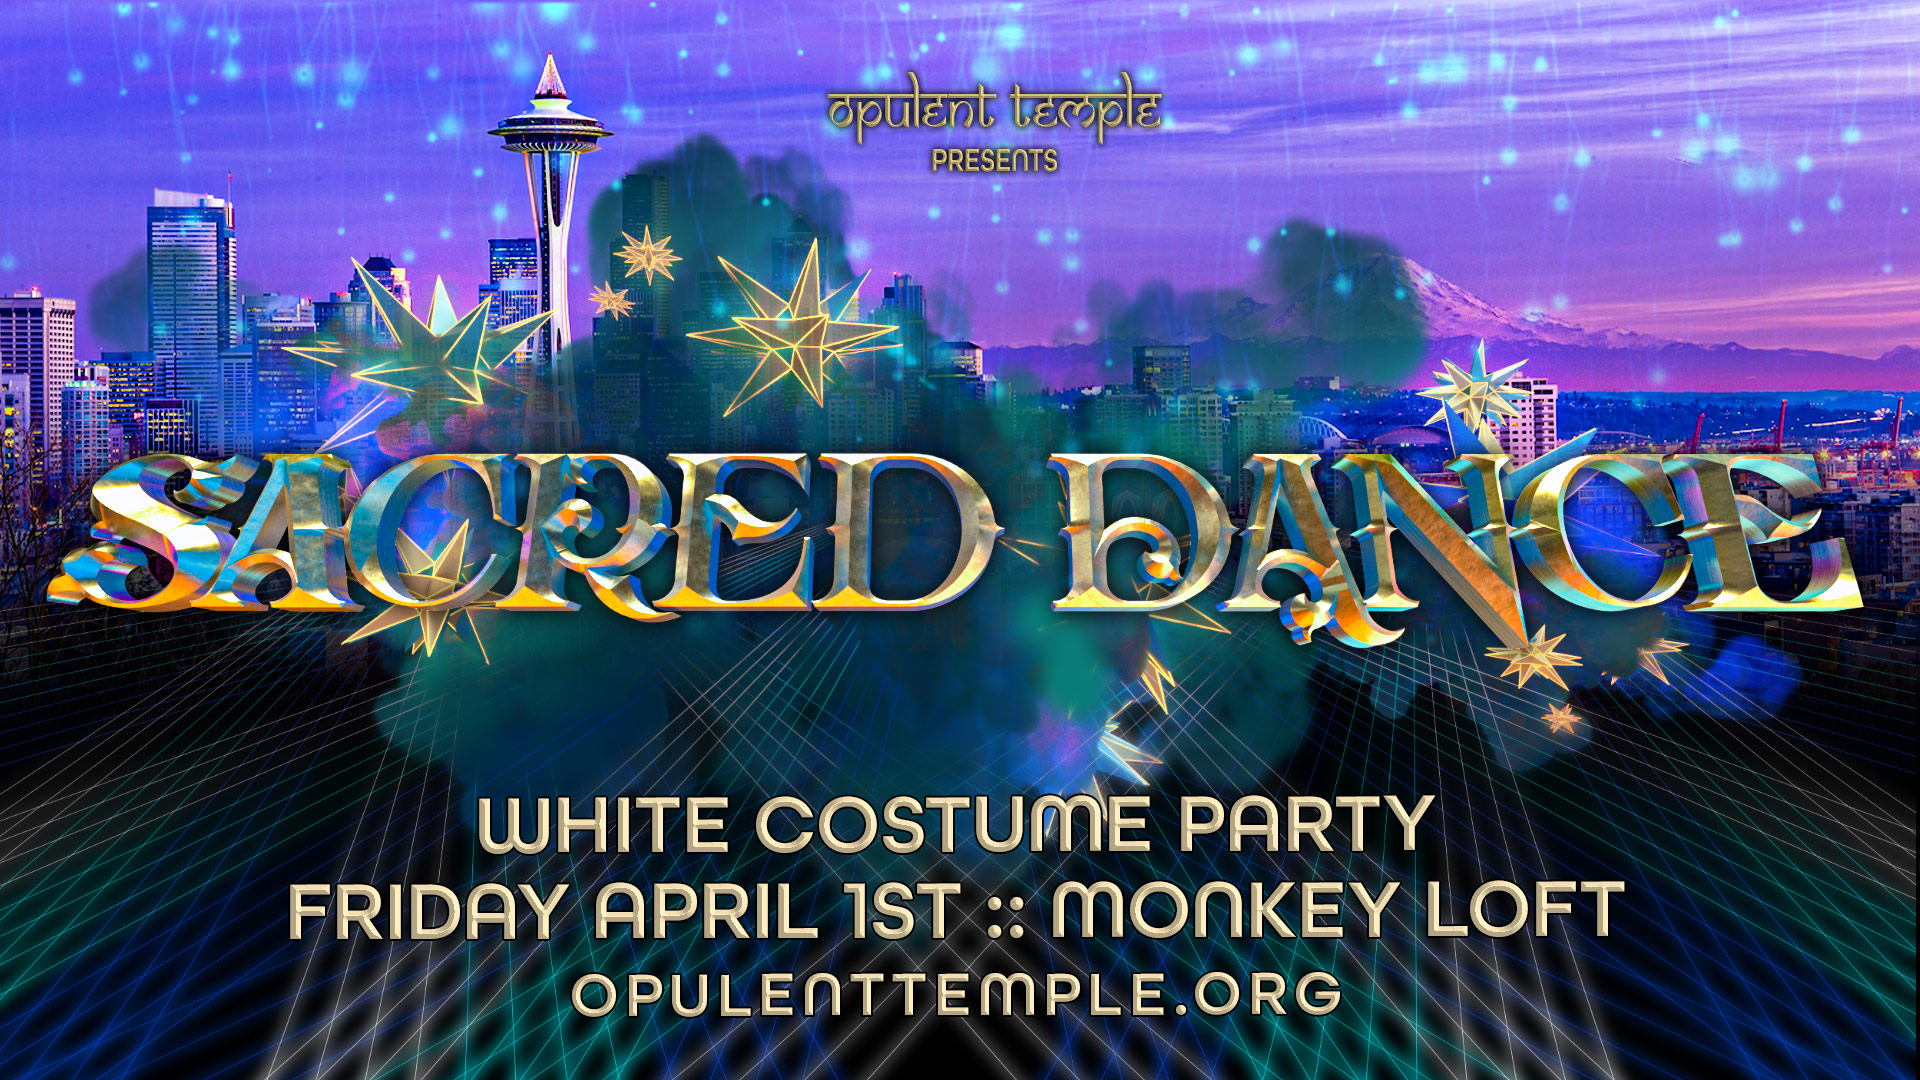 Opulent Temple’s Sacred Dance ‘White Party’ in Seattle 2022